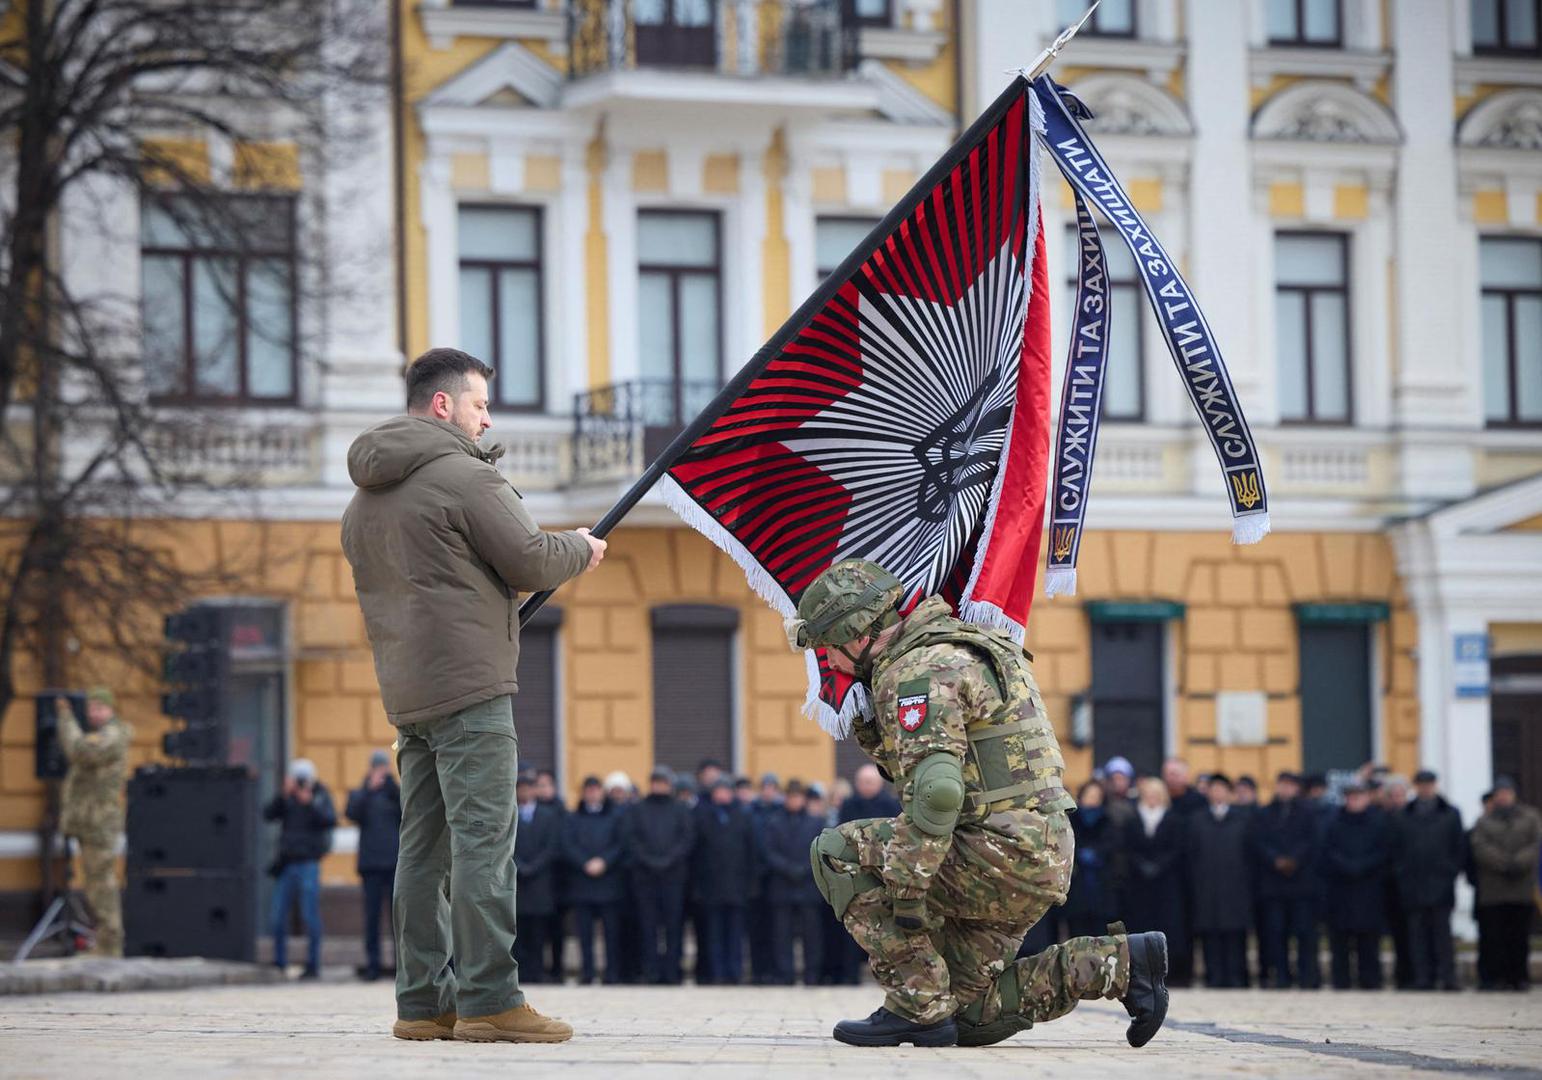 Ukraine's President Volodymyr Zelenskiy handovers a flag to a serviceman during a ceremony dedicated to the first anniversary of the Russian invasion of Ukraine, amid Russia's attack on Ukraine, in Kyiv, Ukraine February 24, 2023. Ukrainian Presidential Press Service/Handout via REUTERS ATTENTION EDITORS - THIS IMAGE HAS BEEN SUPPLIED BY A THIRD PARTY. Photo: Ukrainian Presidential Press Ser/REUTERS